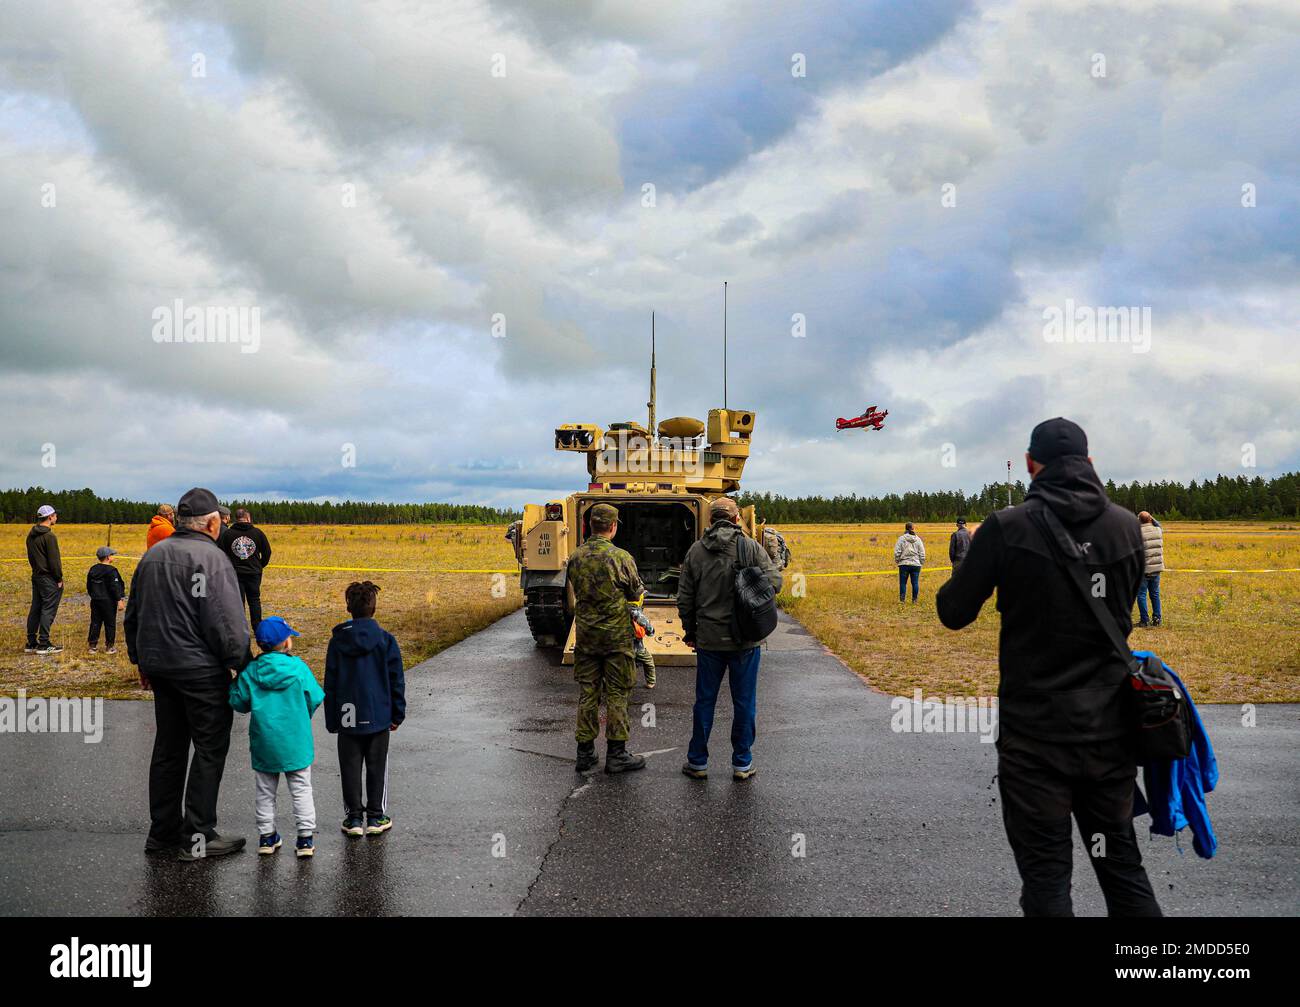 Finnish citizens watch a plane fly as a U.S. Army M2 Bradley Fighting Vehicle assigned to the 4th Squadron, 10th Cavalry Regiment, 3rd Armored Brigade Combat Team, 4th Infantry Division, is displayed during the Oripää Airshow at Säkylä, Finland, July 16, 2022. The 3rd Armored Brigade Combat Team, 4th Infantry Division, and the Pori Brigade of the Finnish army began summer training in Finland to strengthen relations and help build interoperability between the two nations. Stock Photo